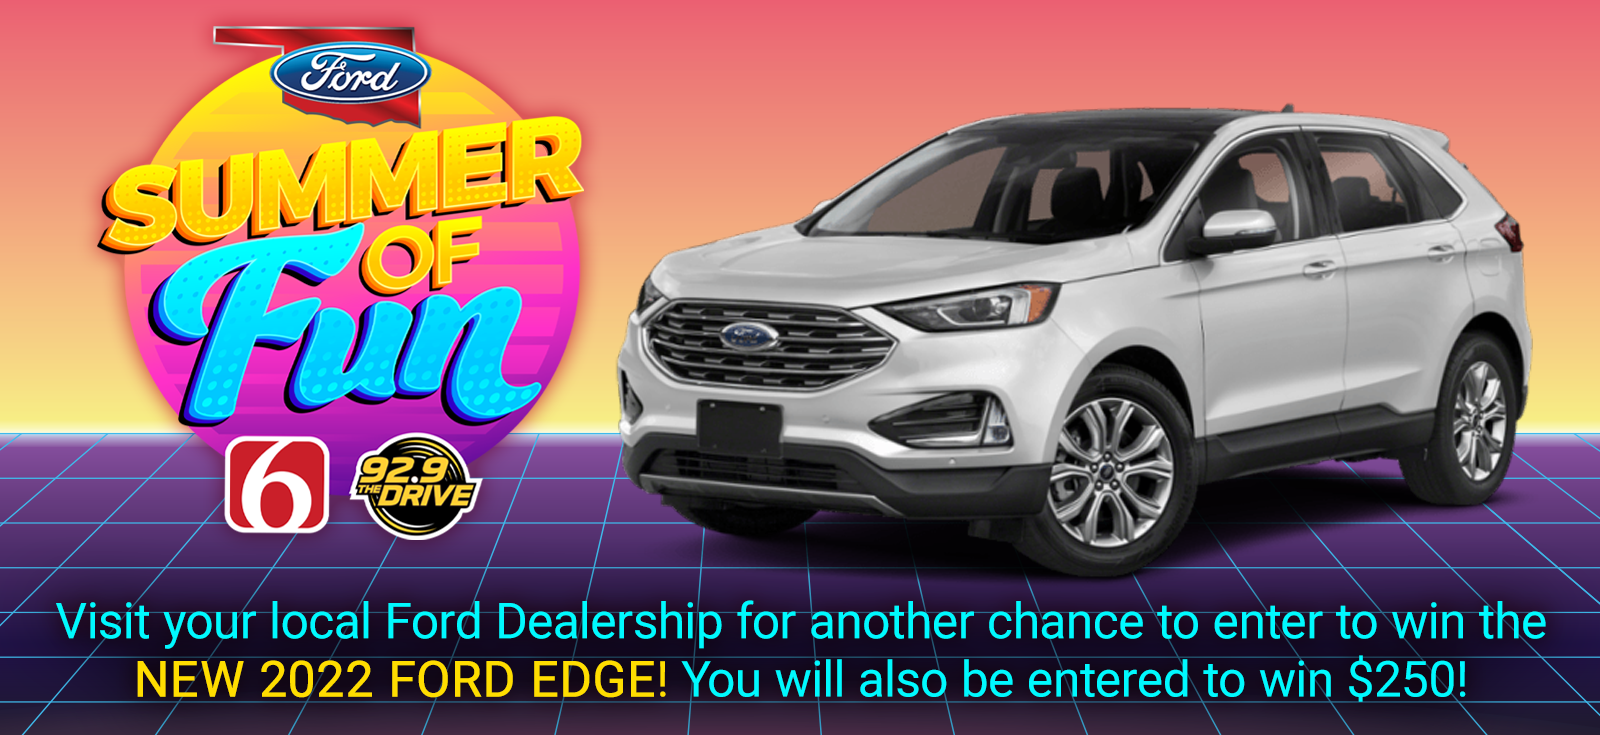 Win a NEW 2022 Ford Edge from News On 6